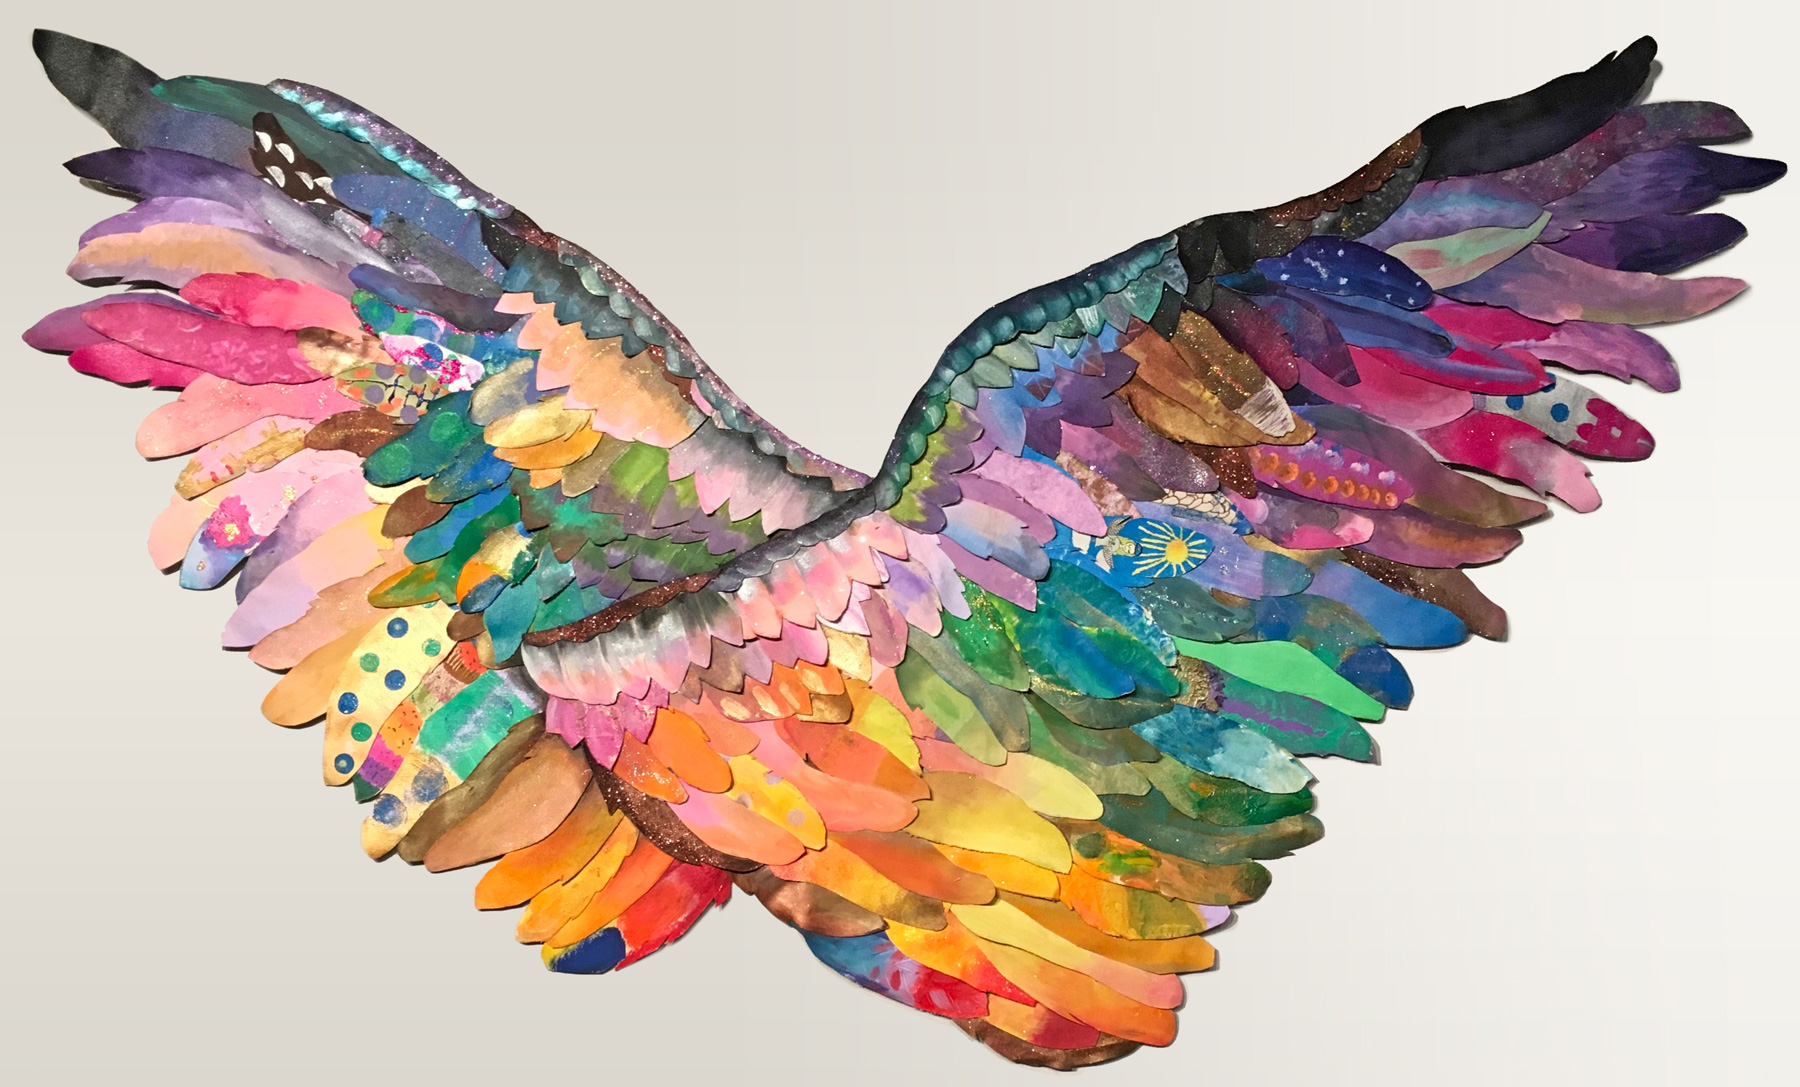 Art of Giving: Spread Your Wings